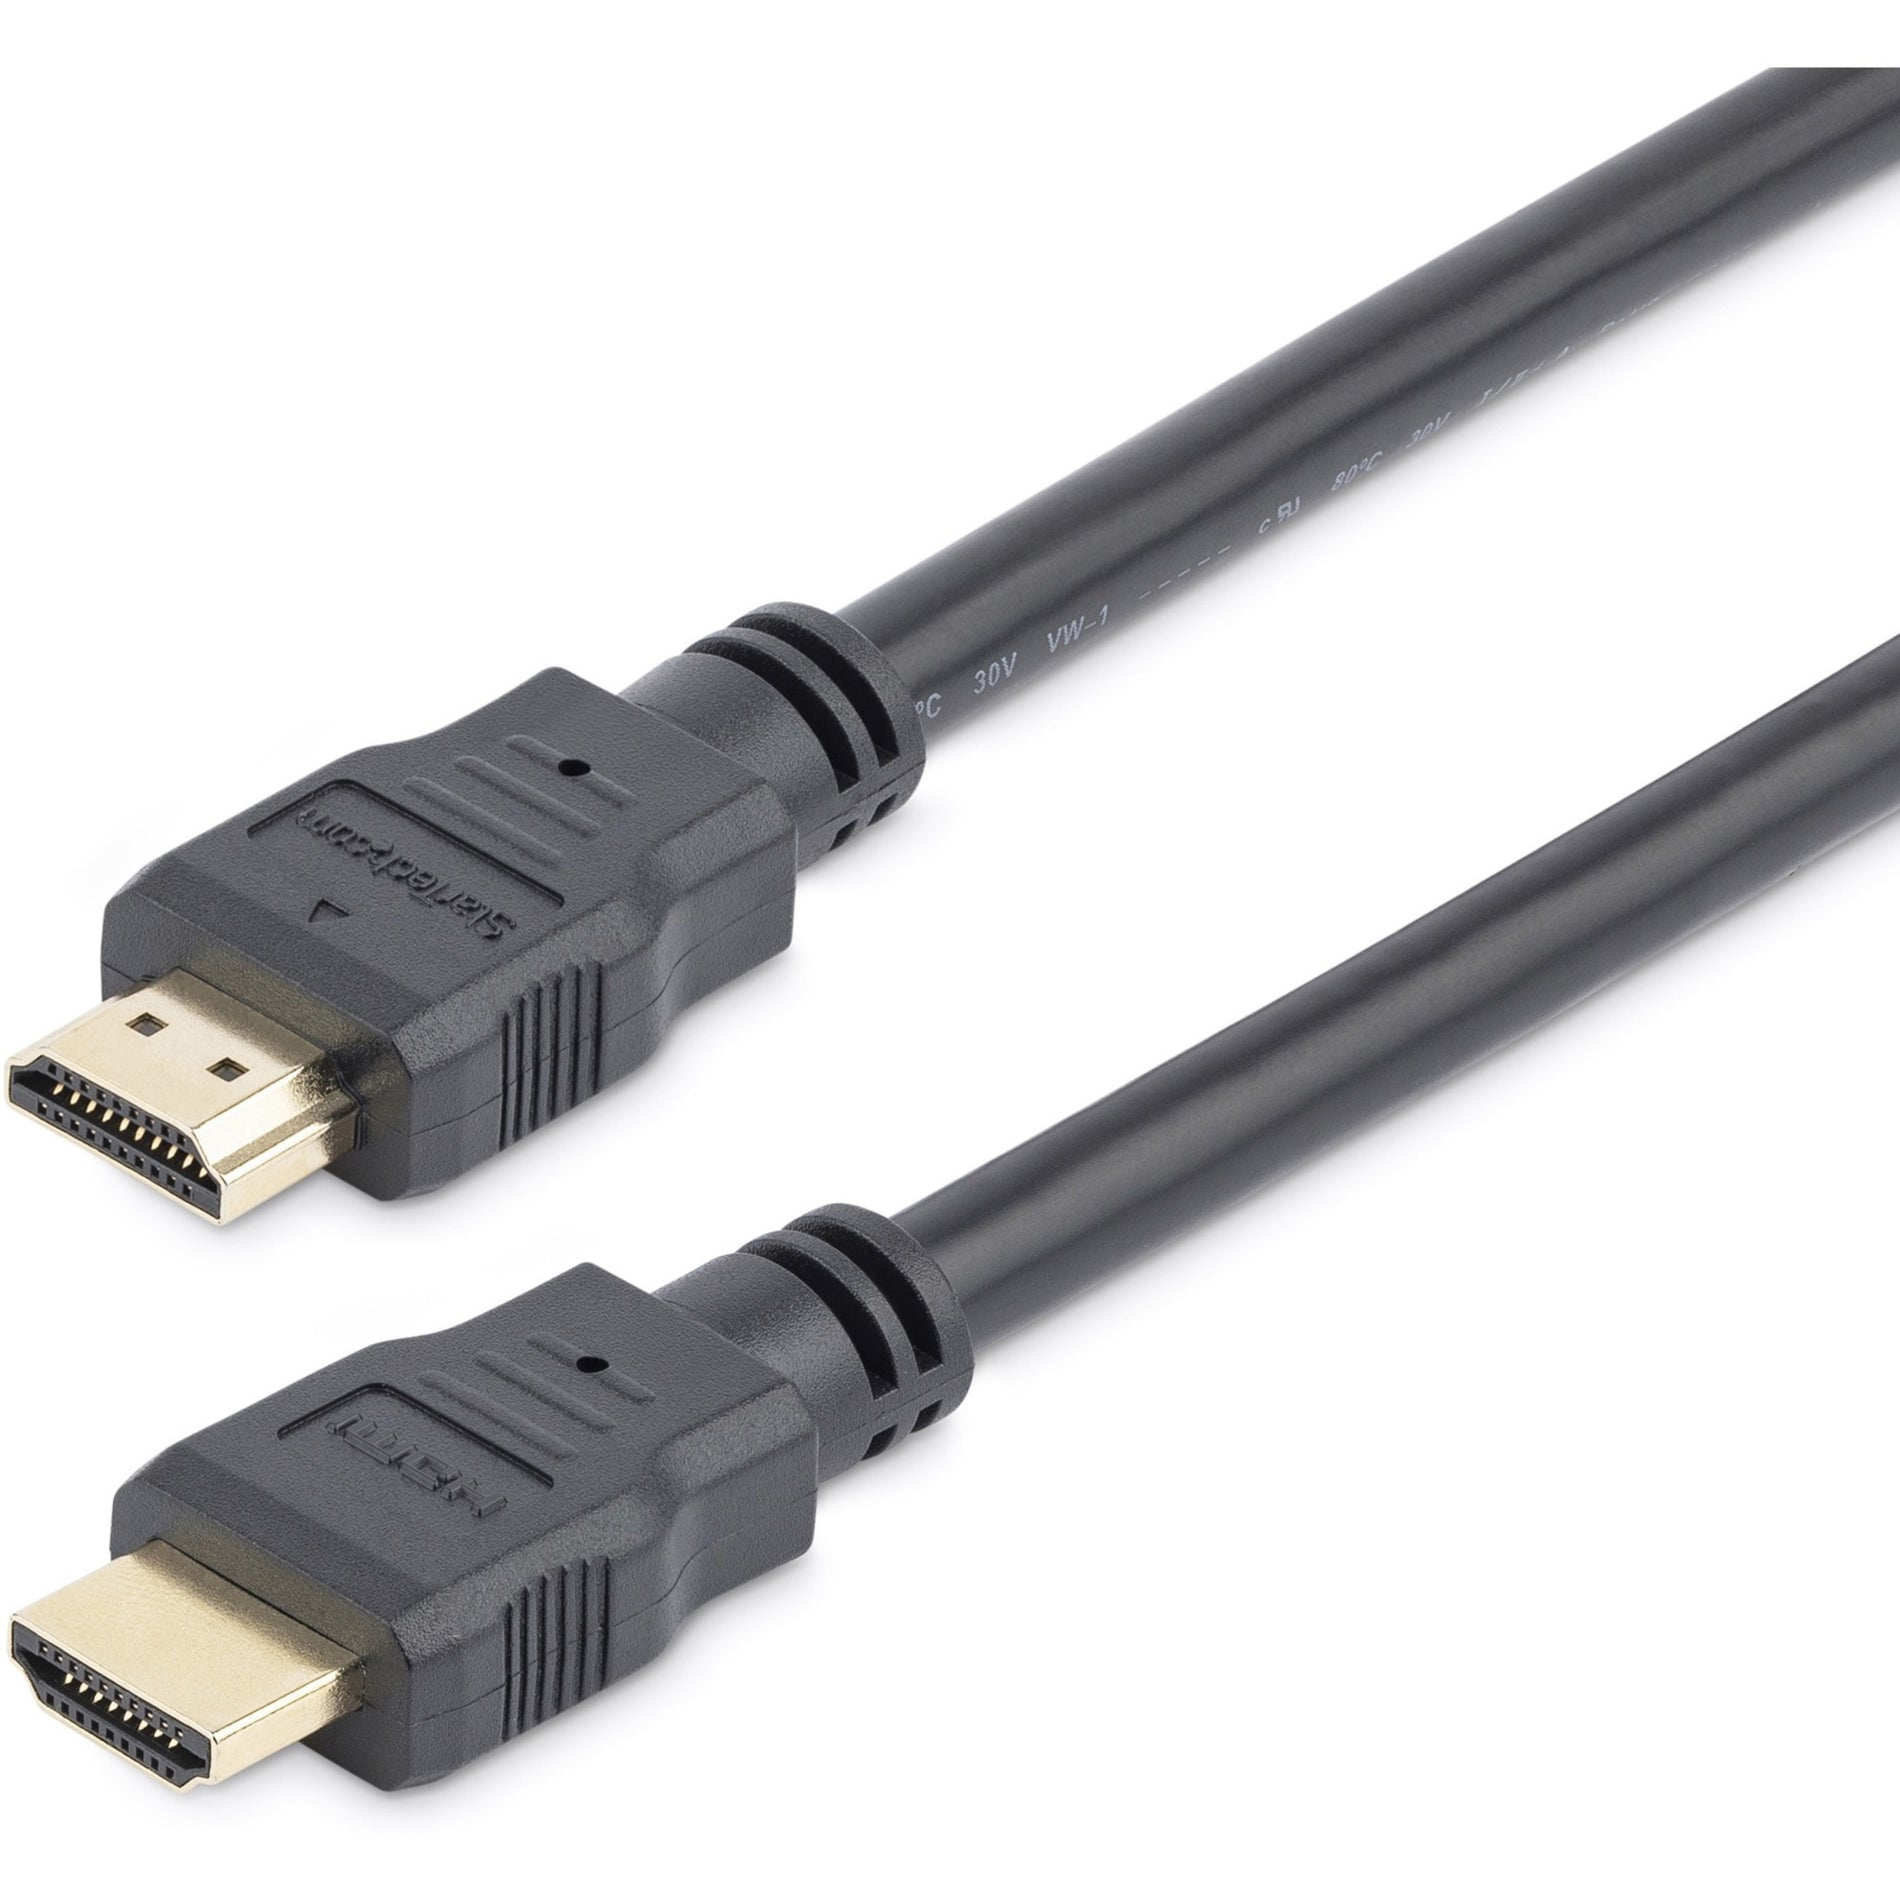 StarTech.com HDMM10 10 ft High Speed HDMI Cable - Ultra HD 4k x 2k HDMI Cable, Gold-Plated Connectors, Black